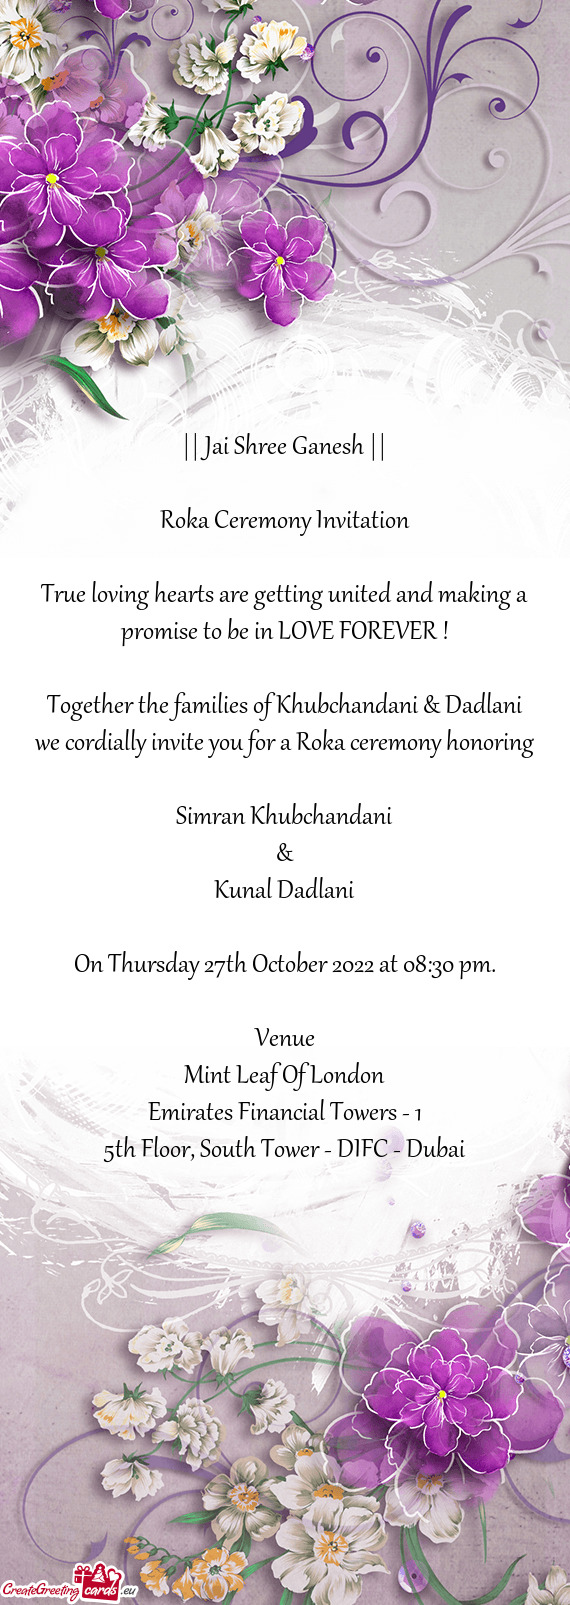 Together the families of Khubchandani & Dadlani we cordially invite you for a Roka ceremony honoring